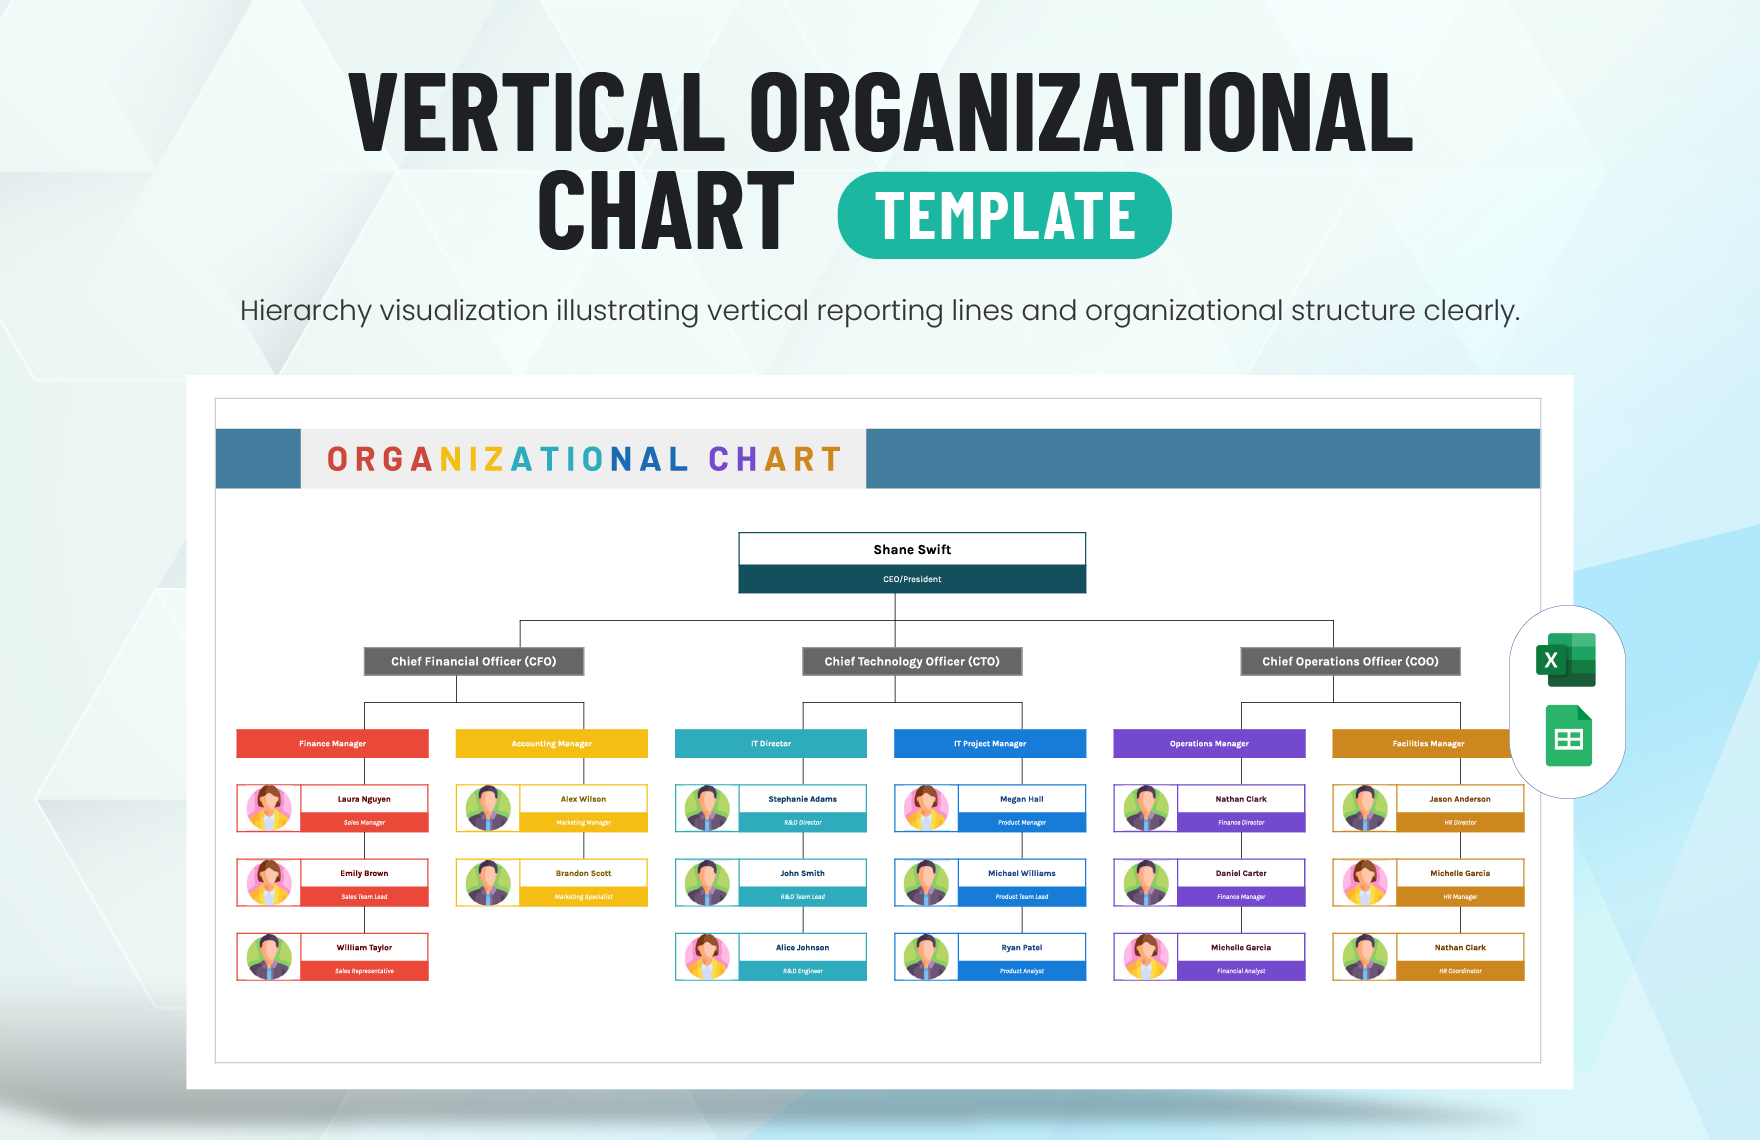 Vertical Organizational Chart Template in Excel, Google Sheets